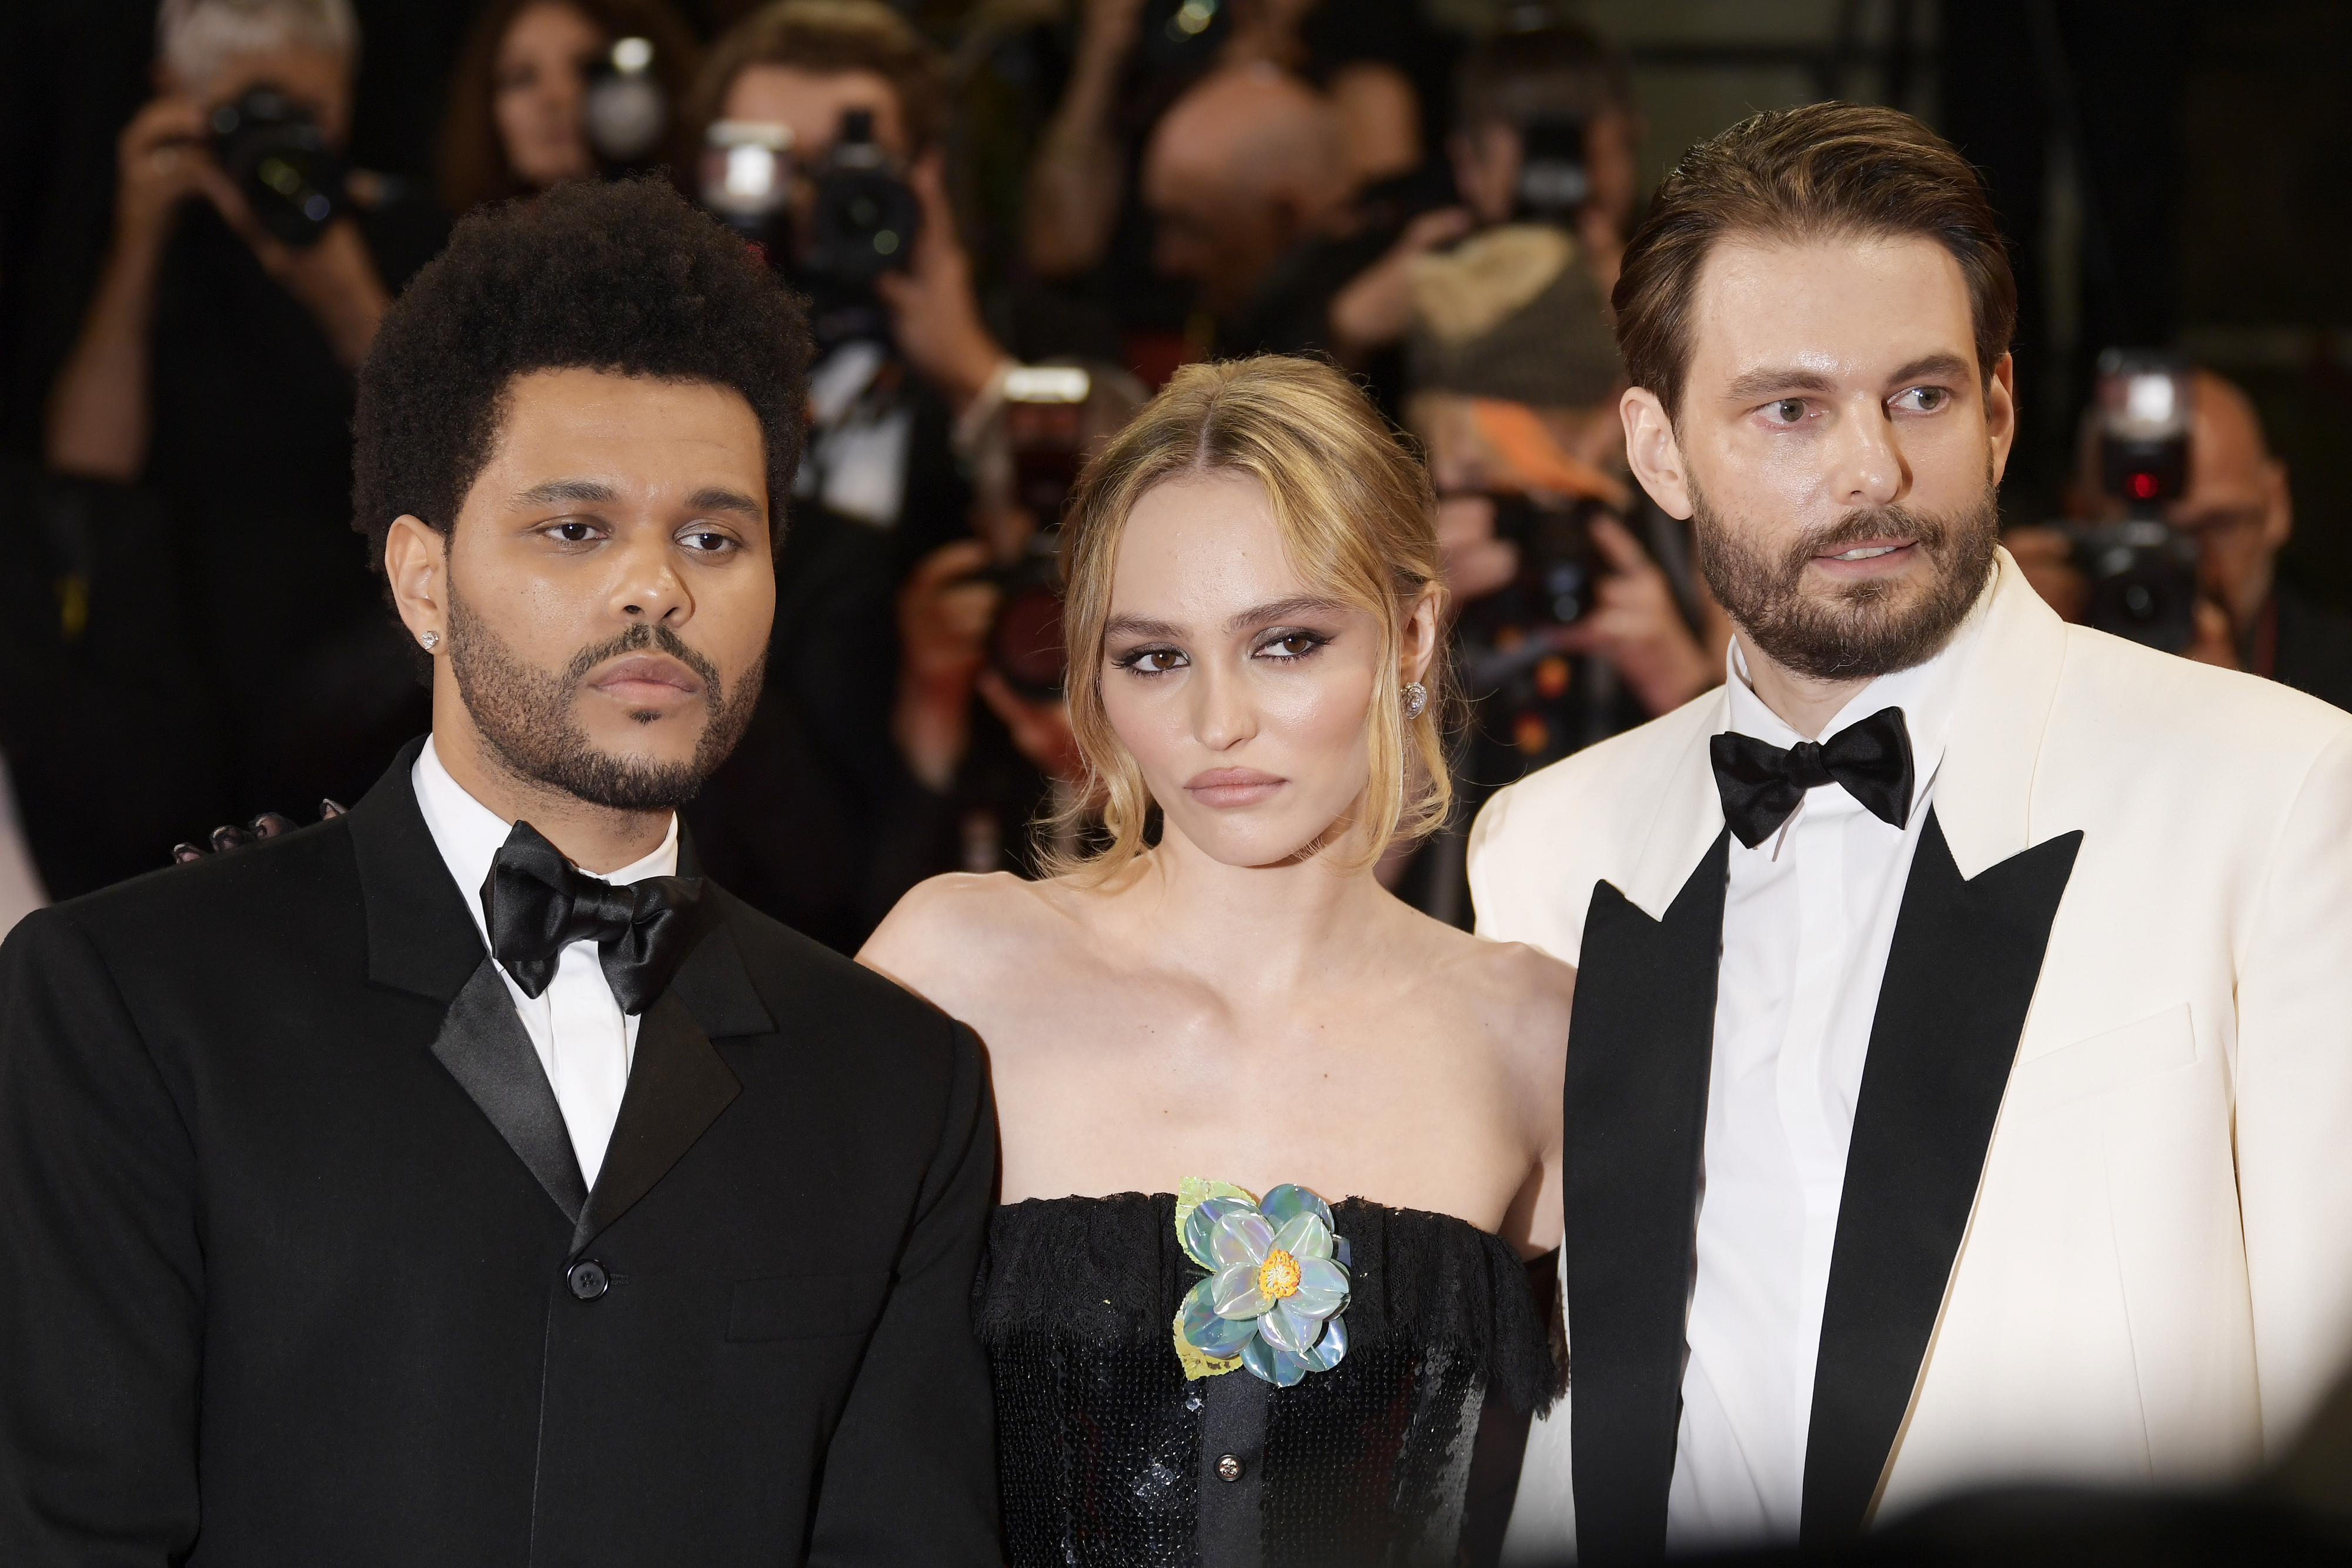 A close-up of Abel, Lily-Rose, and Sam at a media event